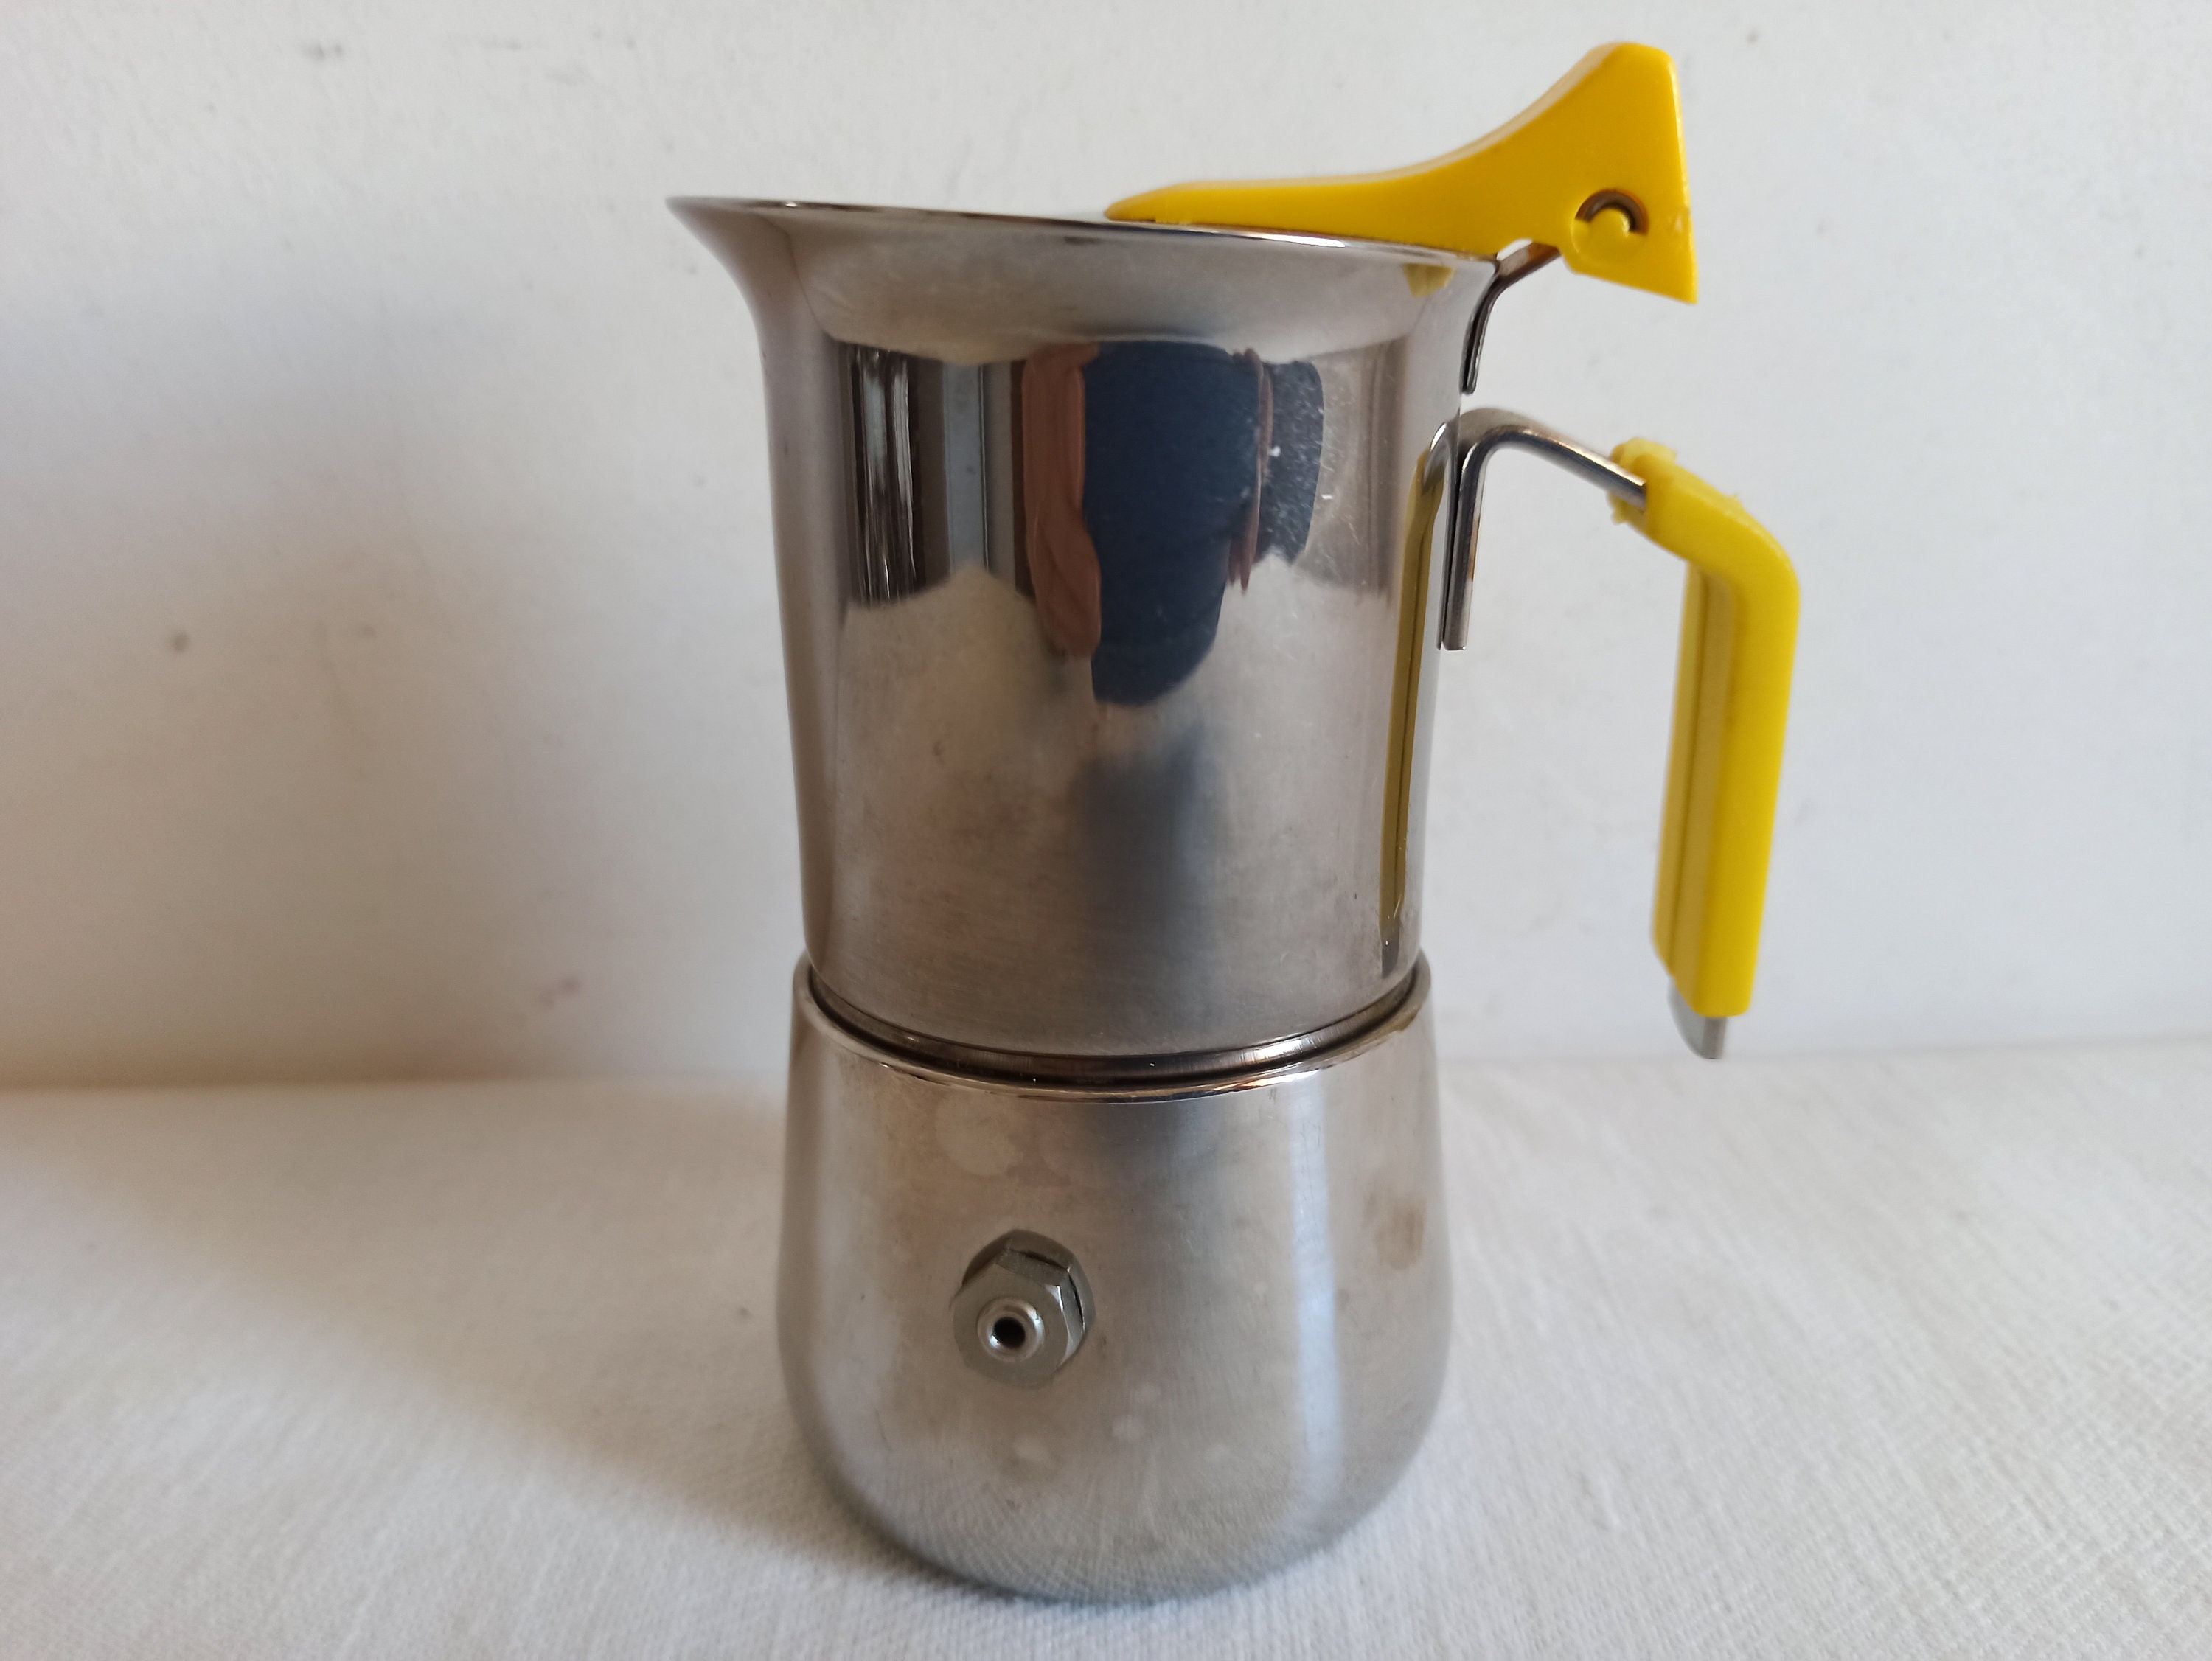 G.A.T Inox 18/10 Stovetop Espresso Maker 6 Cups Vintage Italy Stainless  Steel